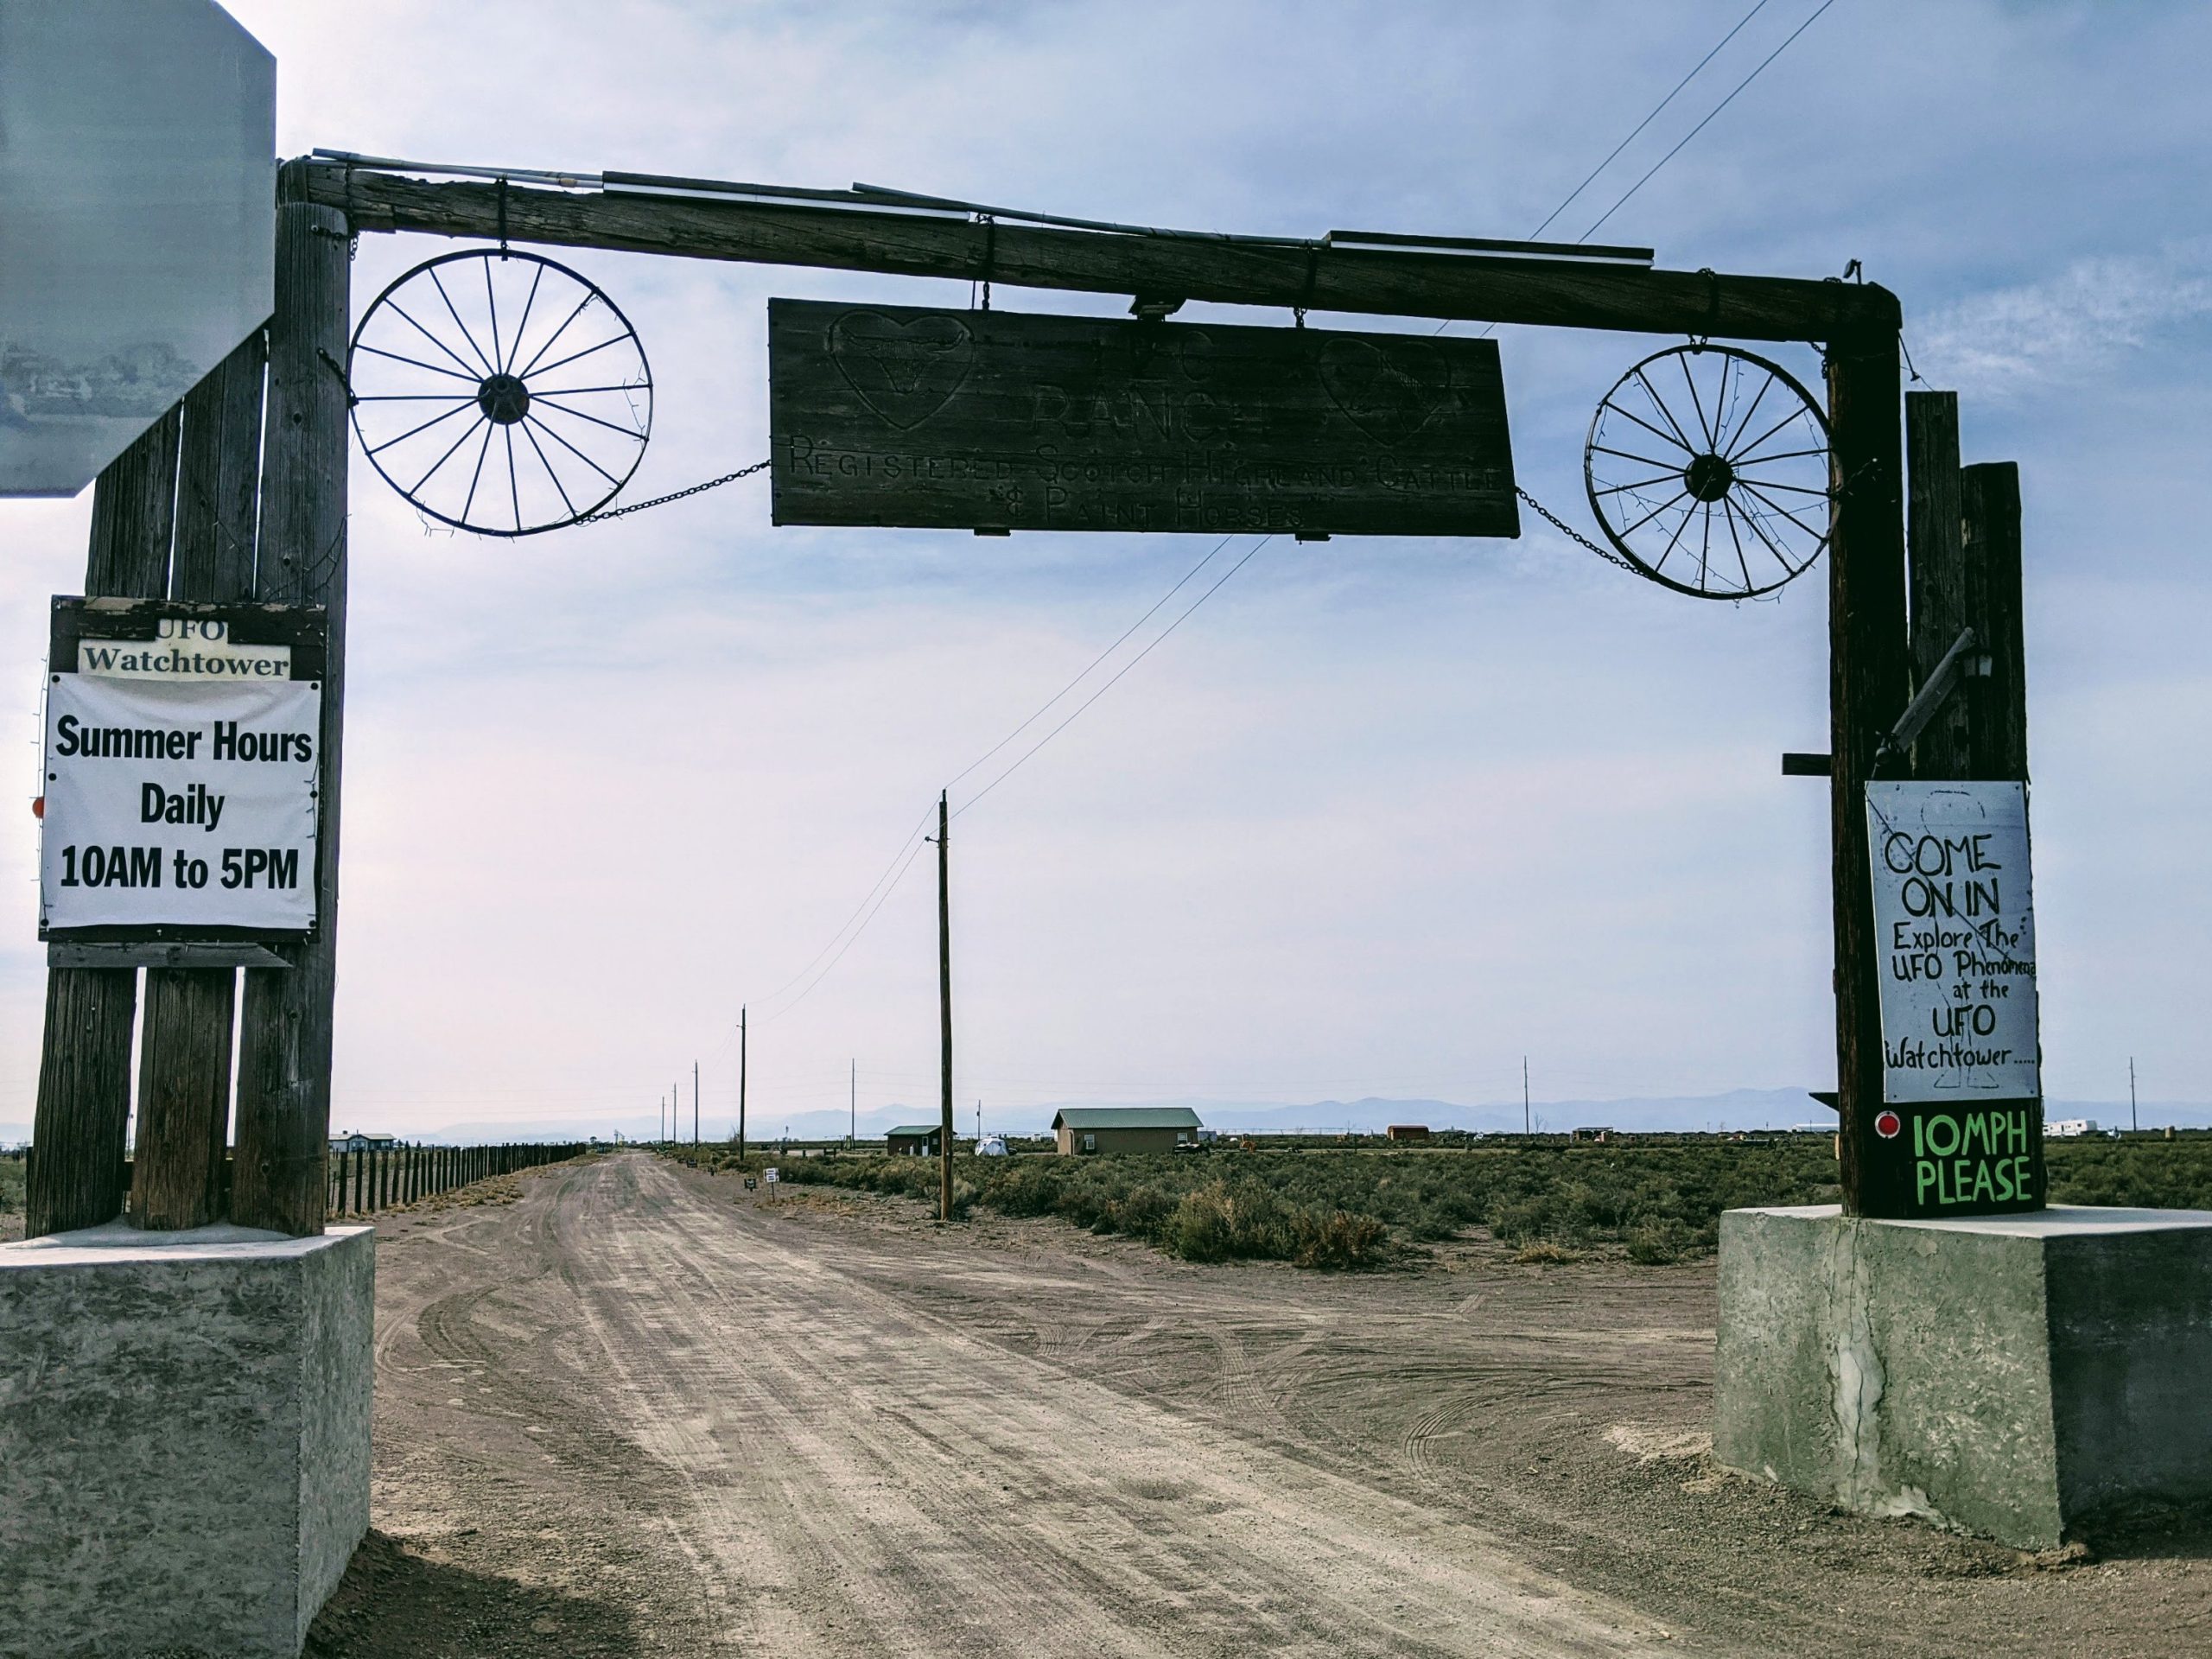 The Entrance to the UFO Watchtower